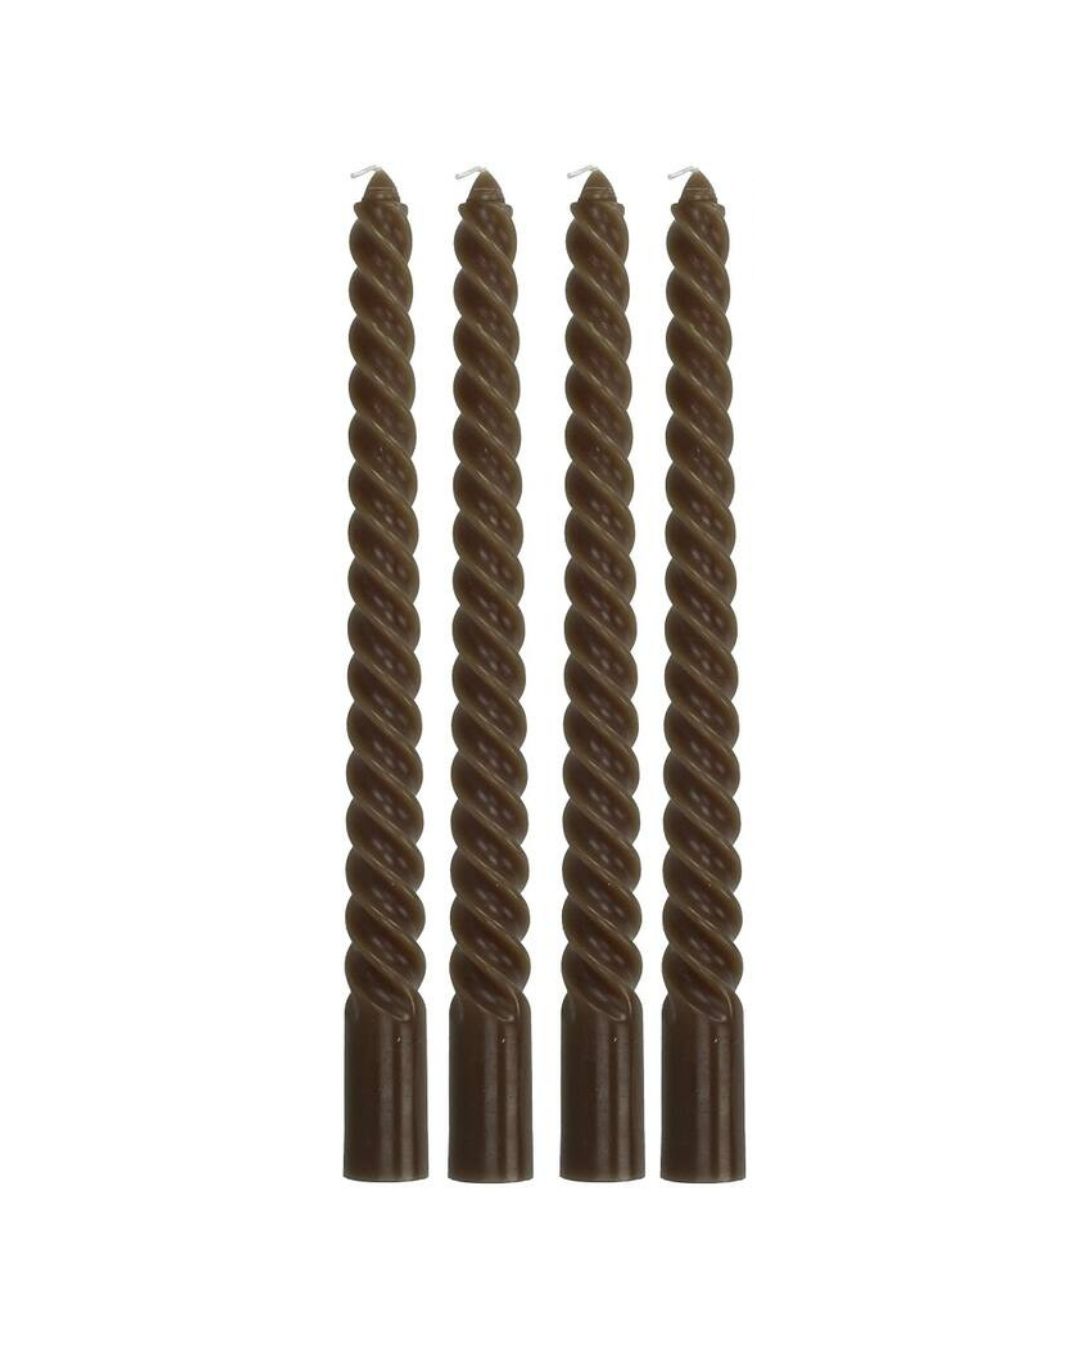 Twisted Candles - Brown (Box of 4)